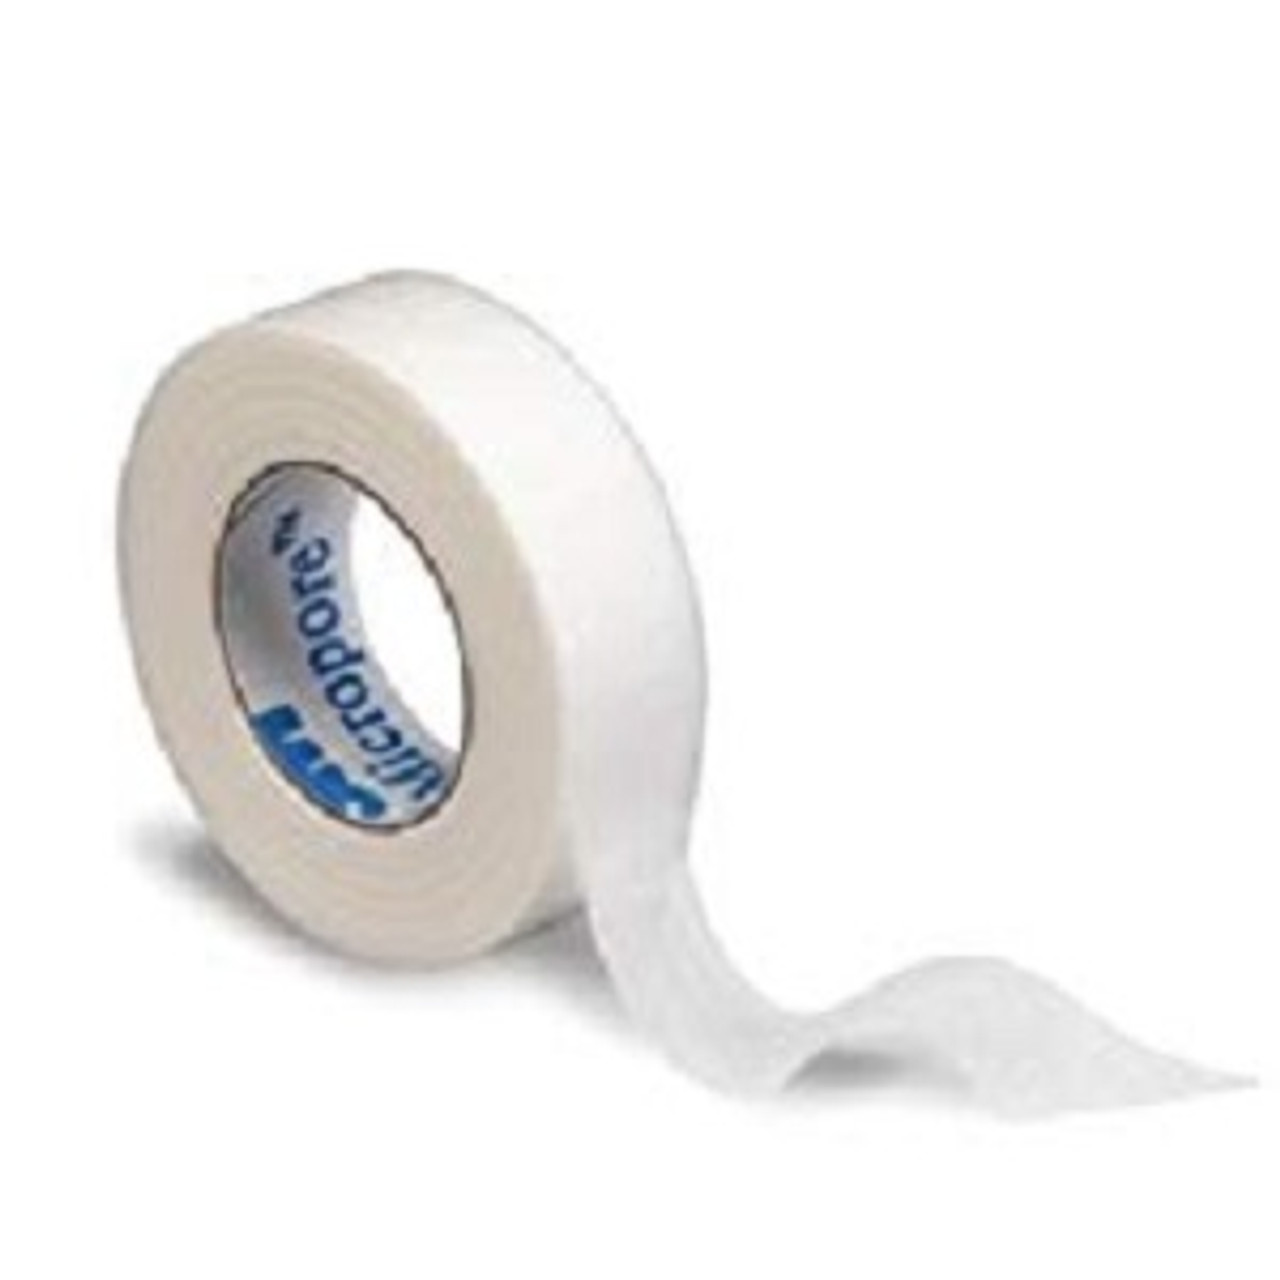 3M 1530-1 Micropore Surgical Tape, 1 x 10 yds